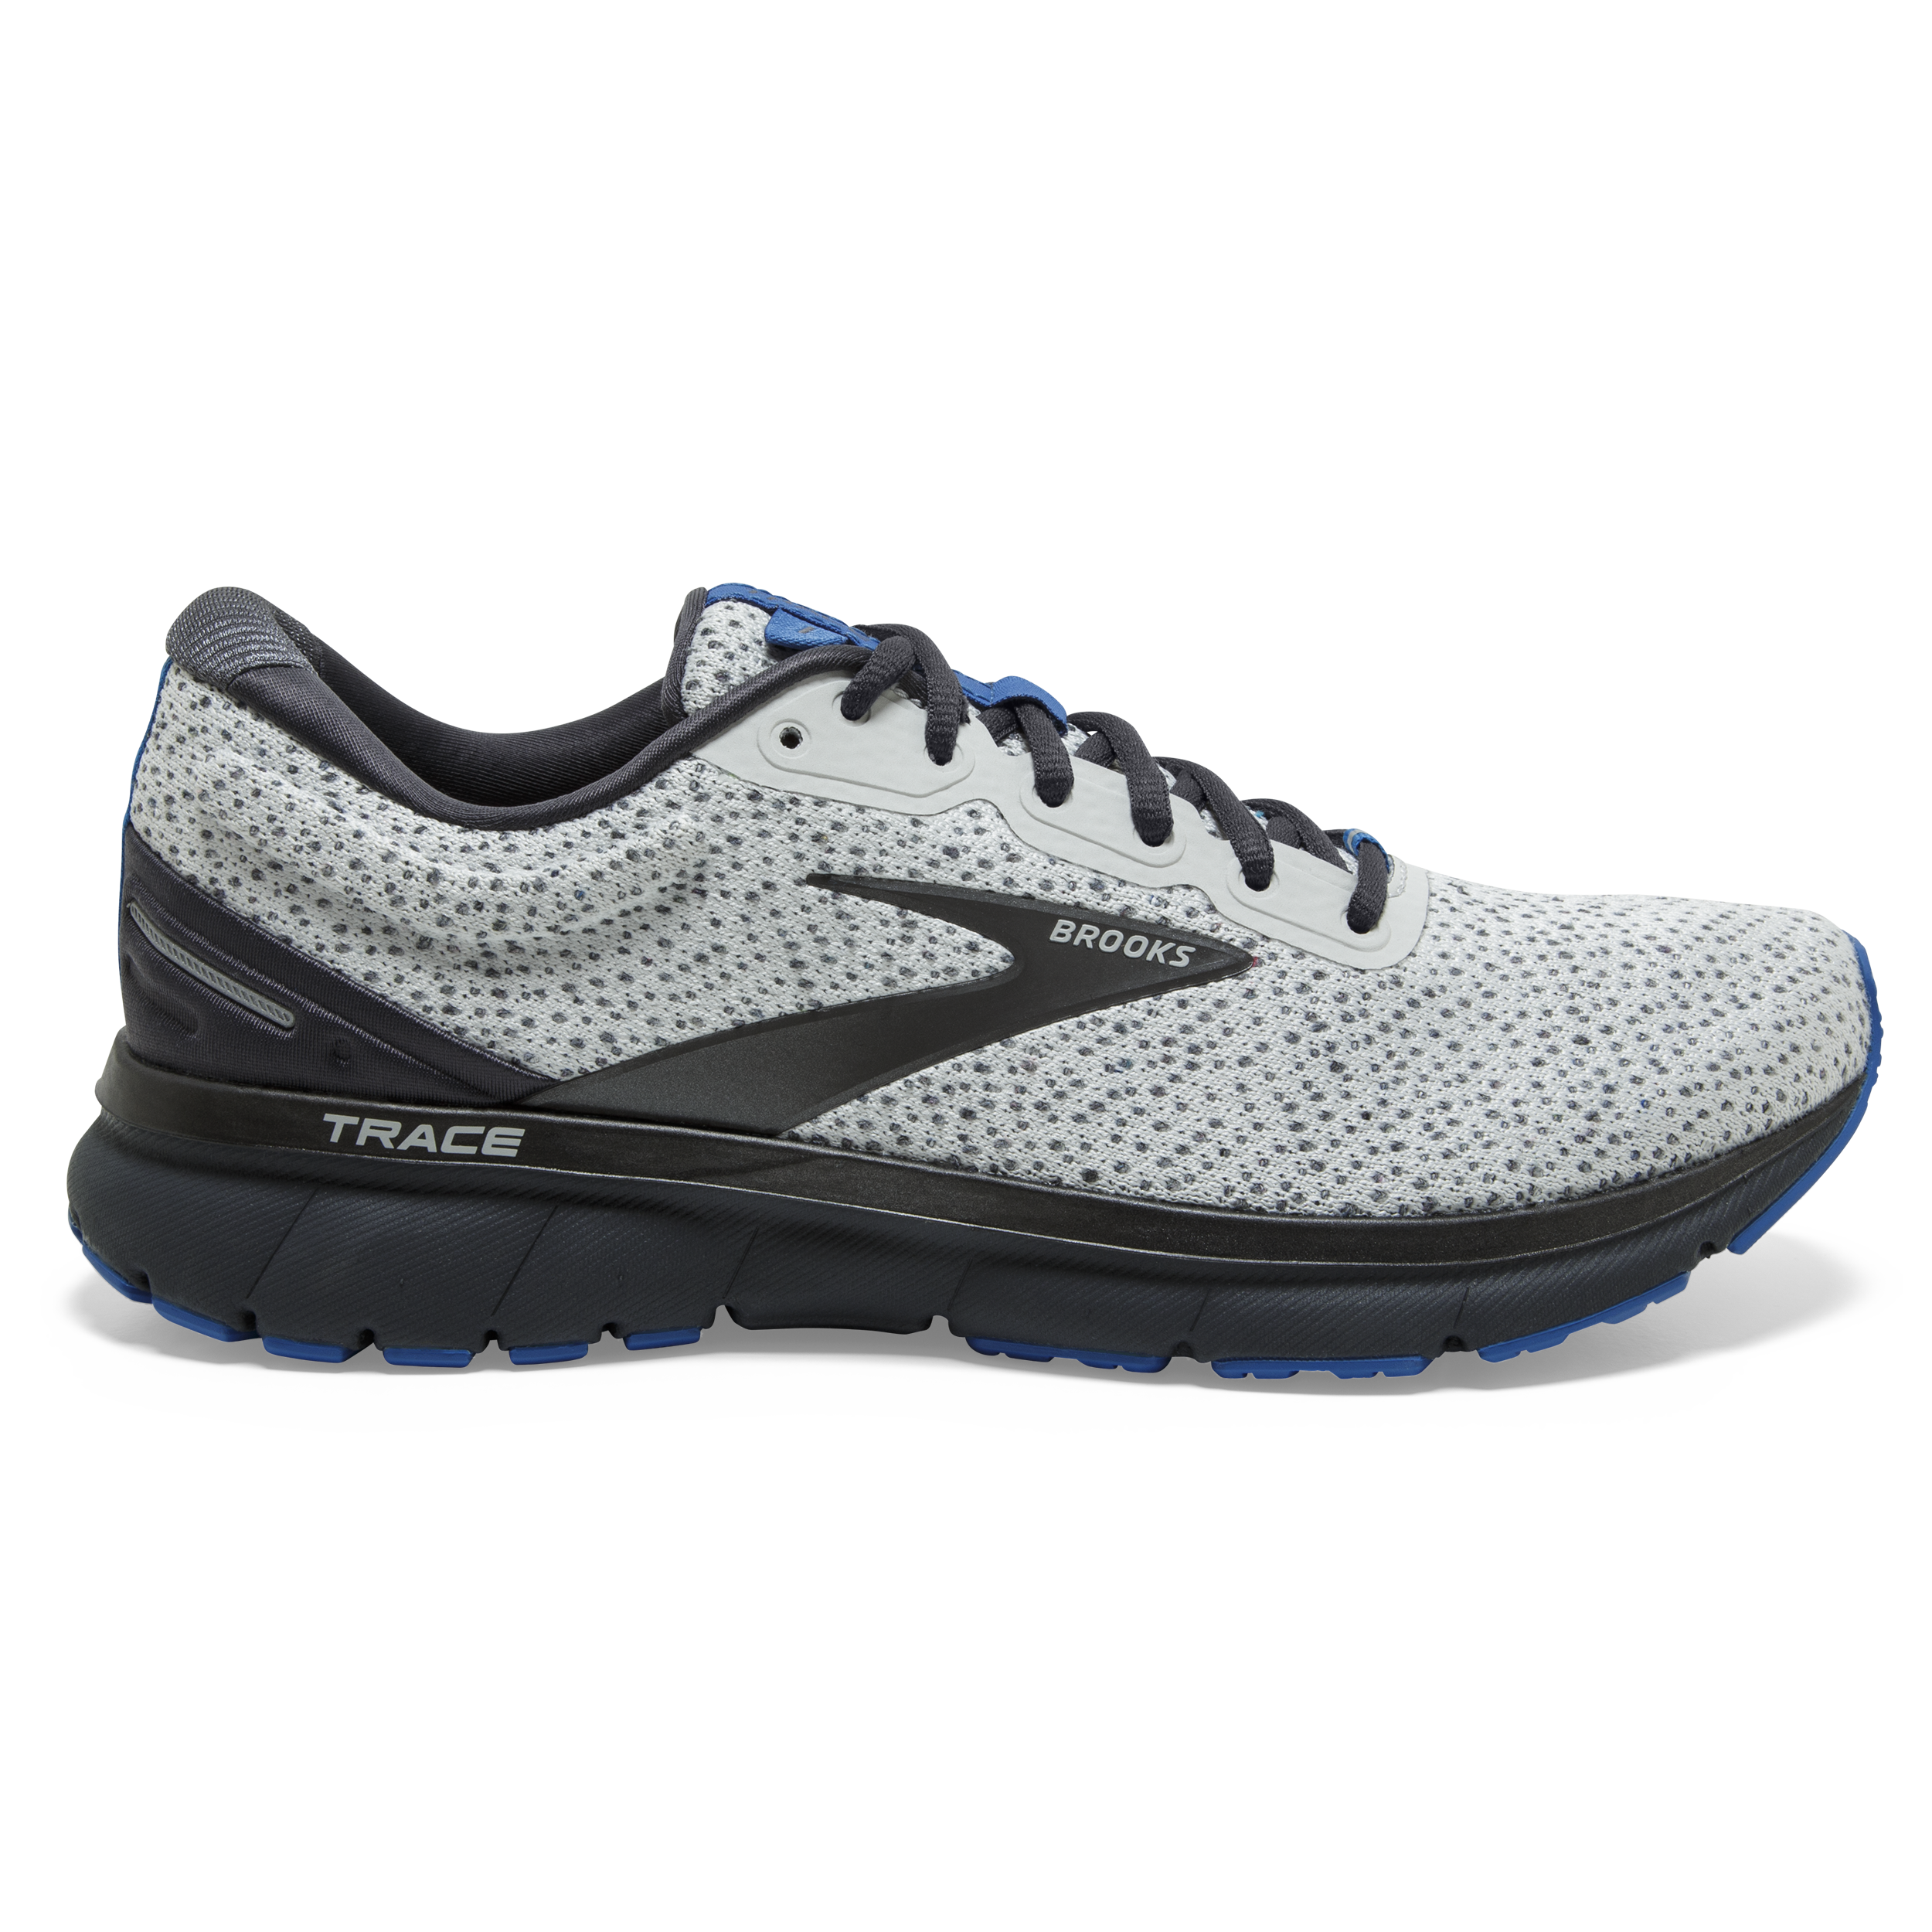 Trace - Men's running shoes